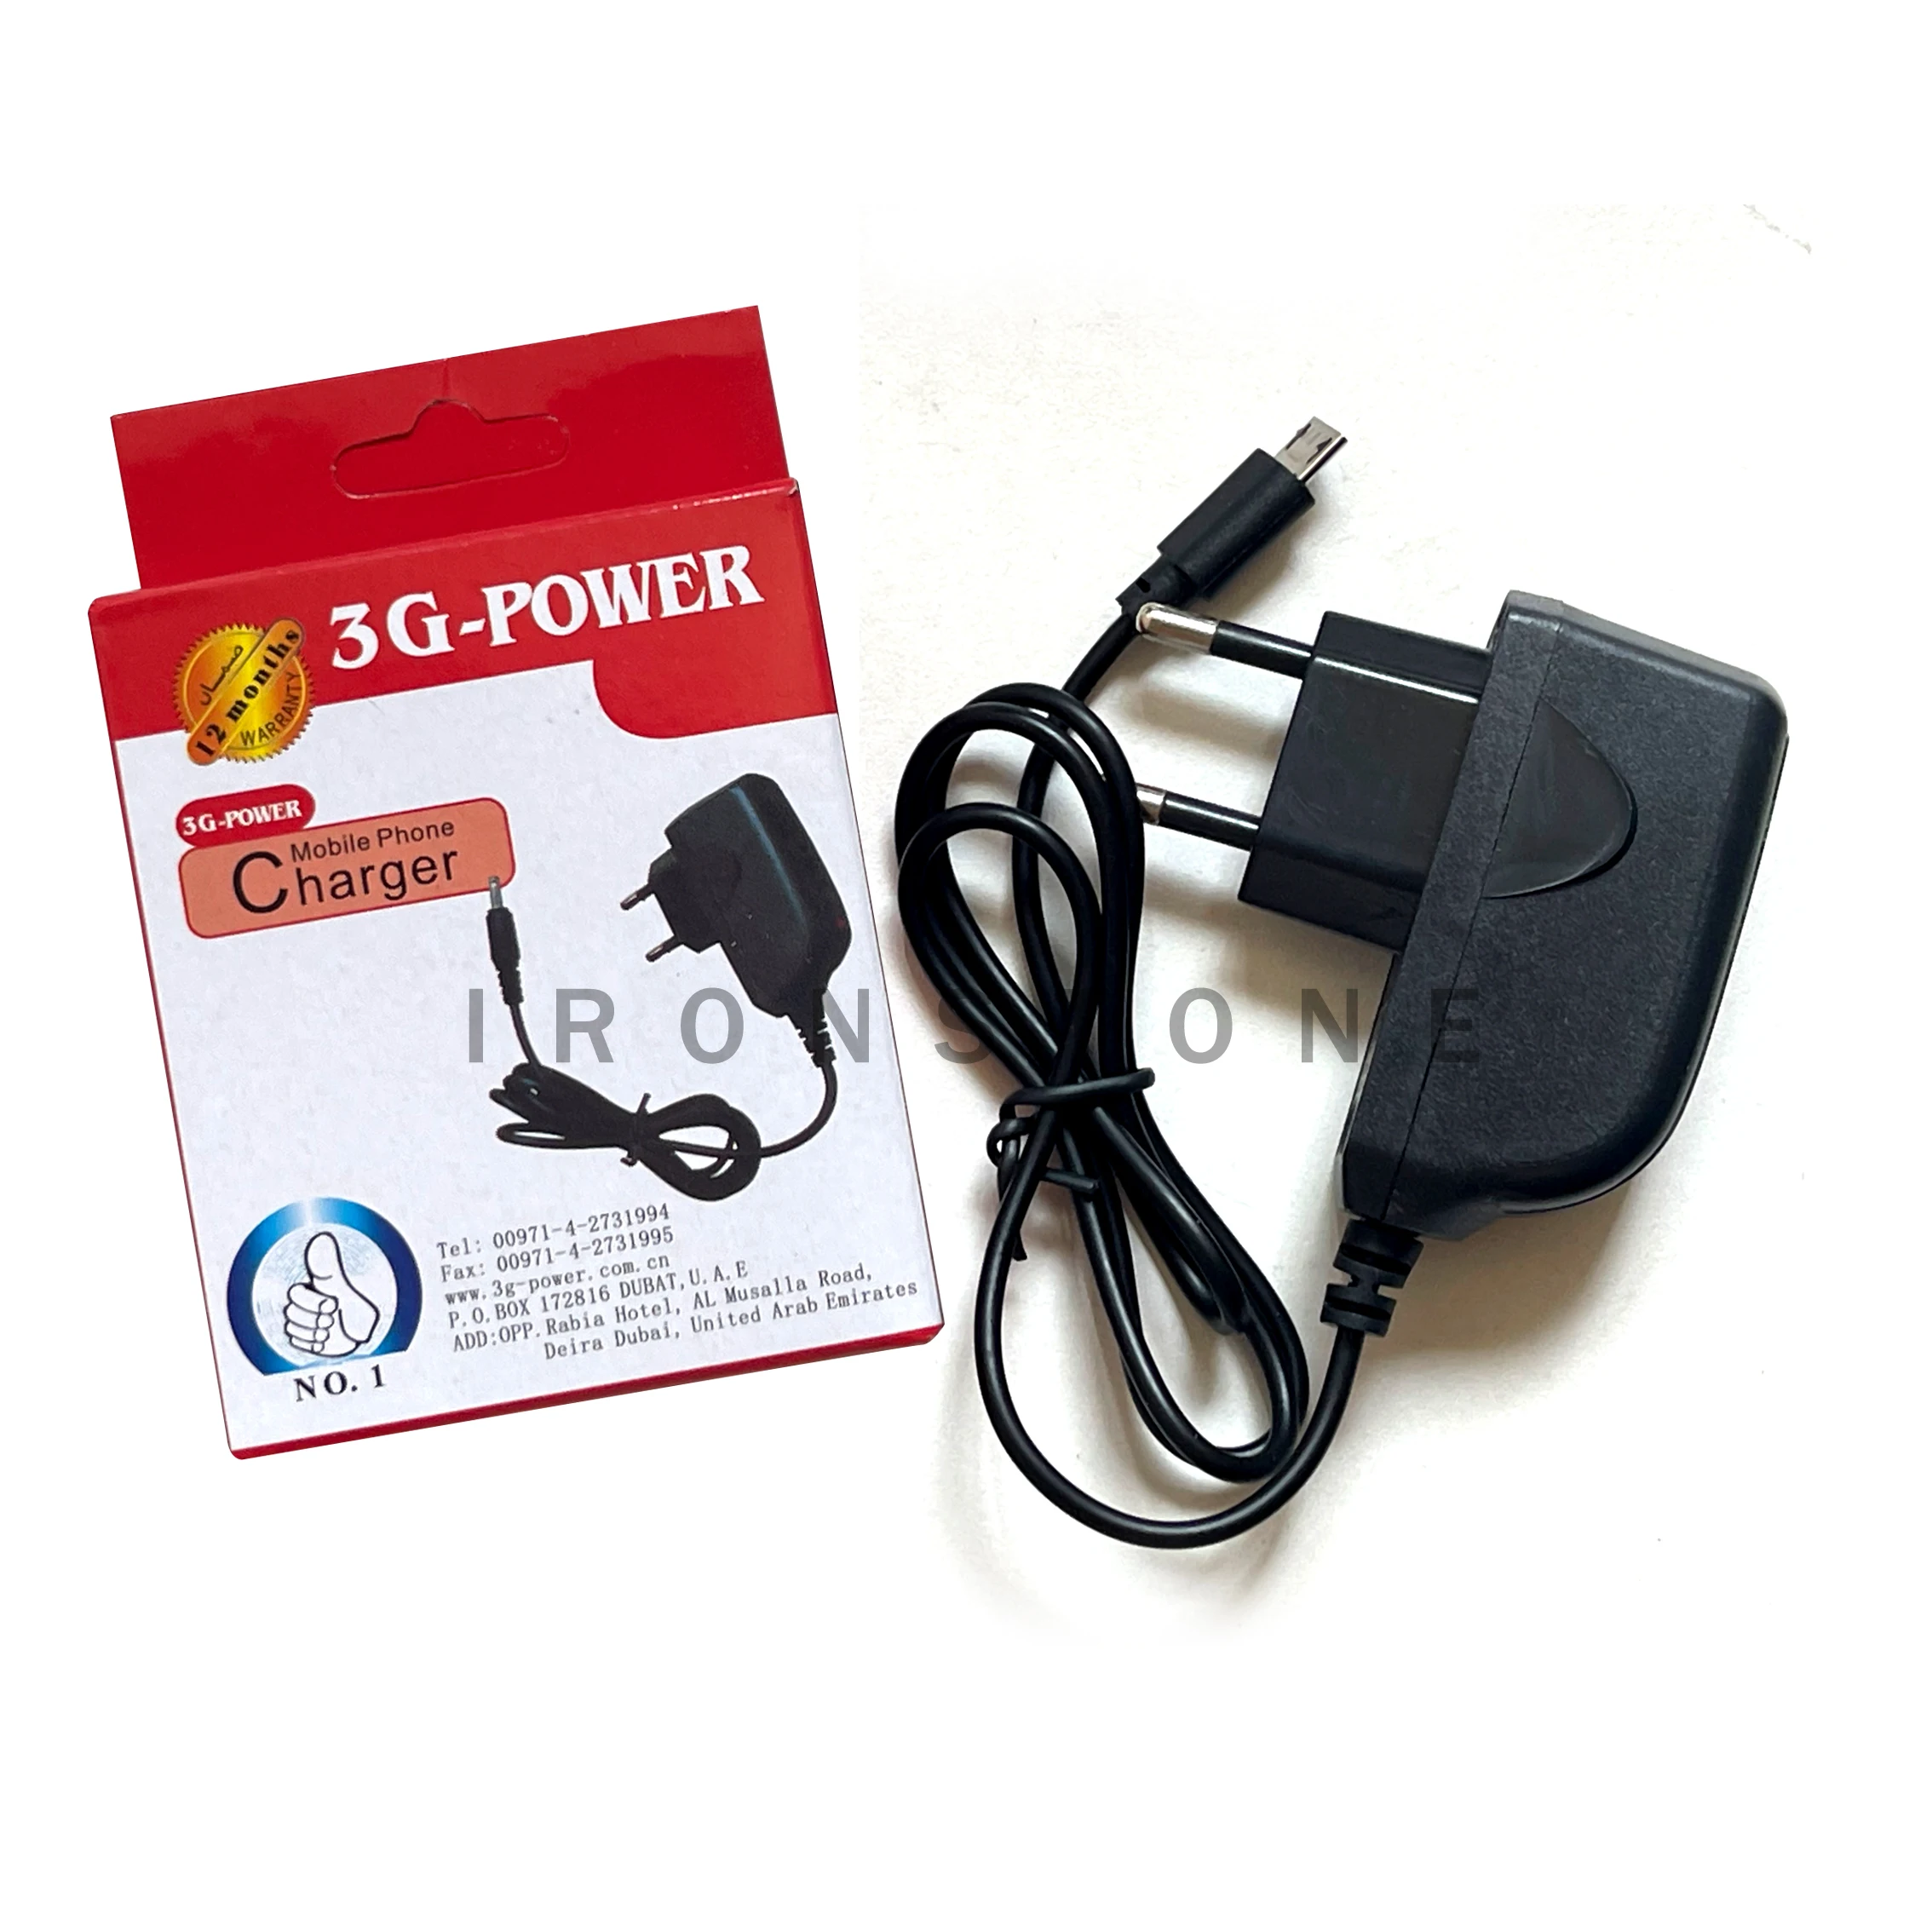 3g-power Micro Usb Charger Phone Charger Tpc Charger For 3g-power - Buy 3g- power Micro Usb Charger Phone Charger Tpc Charger For 3g-power,3g-power  Micro Usb Charger Phone Charger Tpc Charger For 3g-power,3g-power Micro